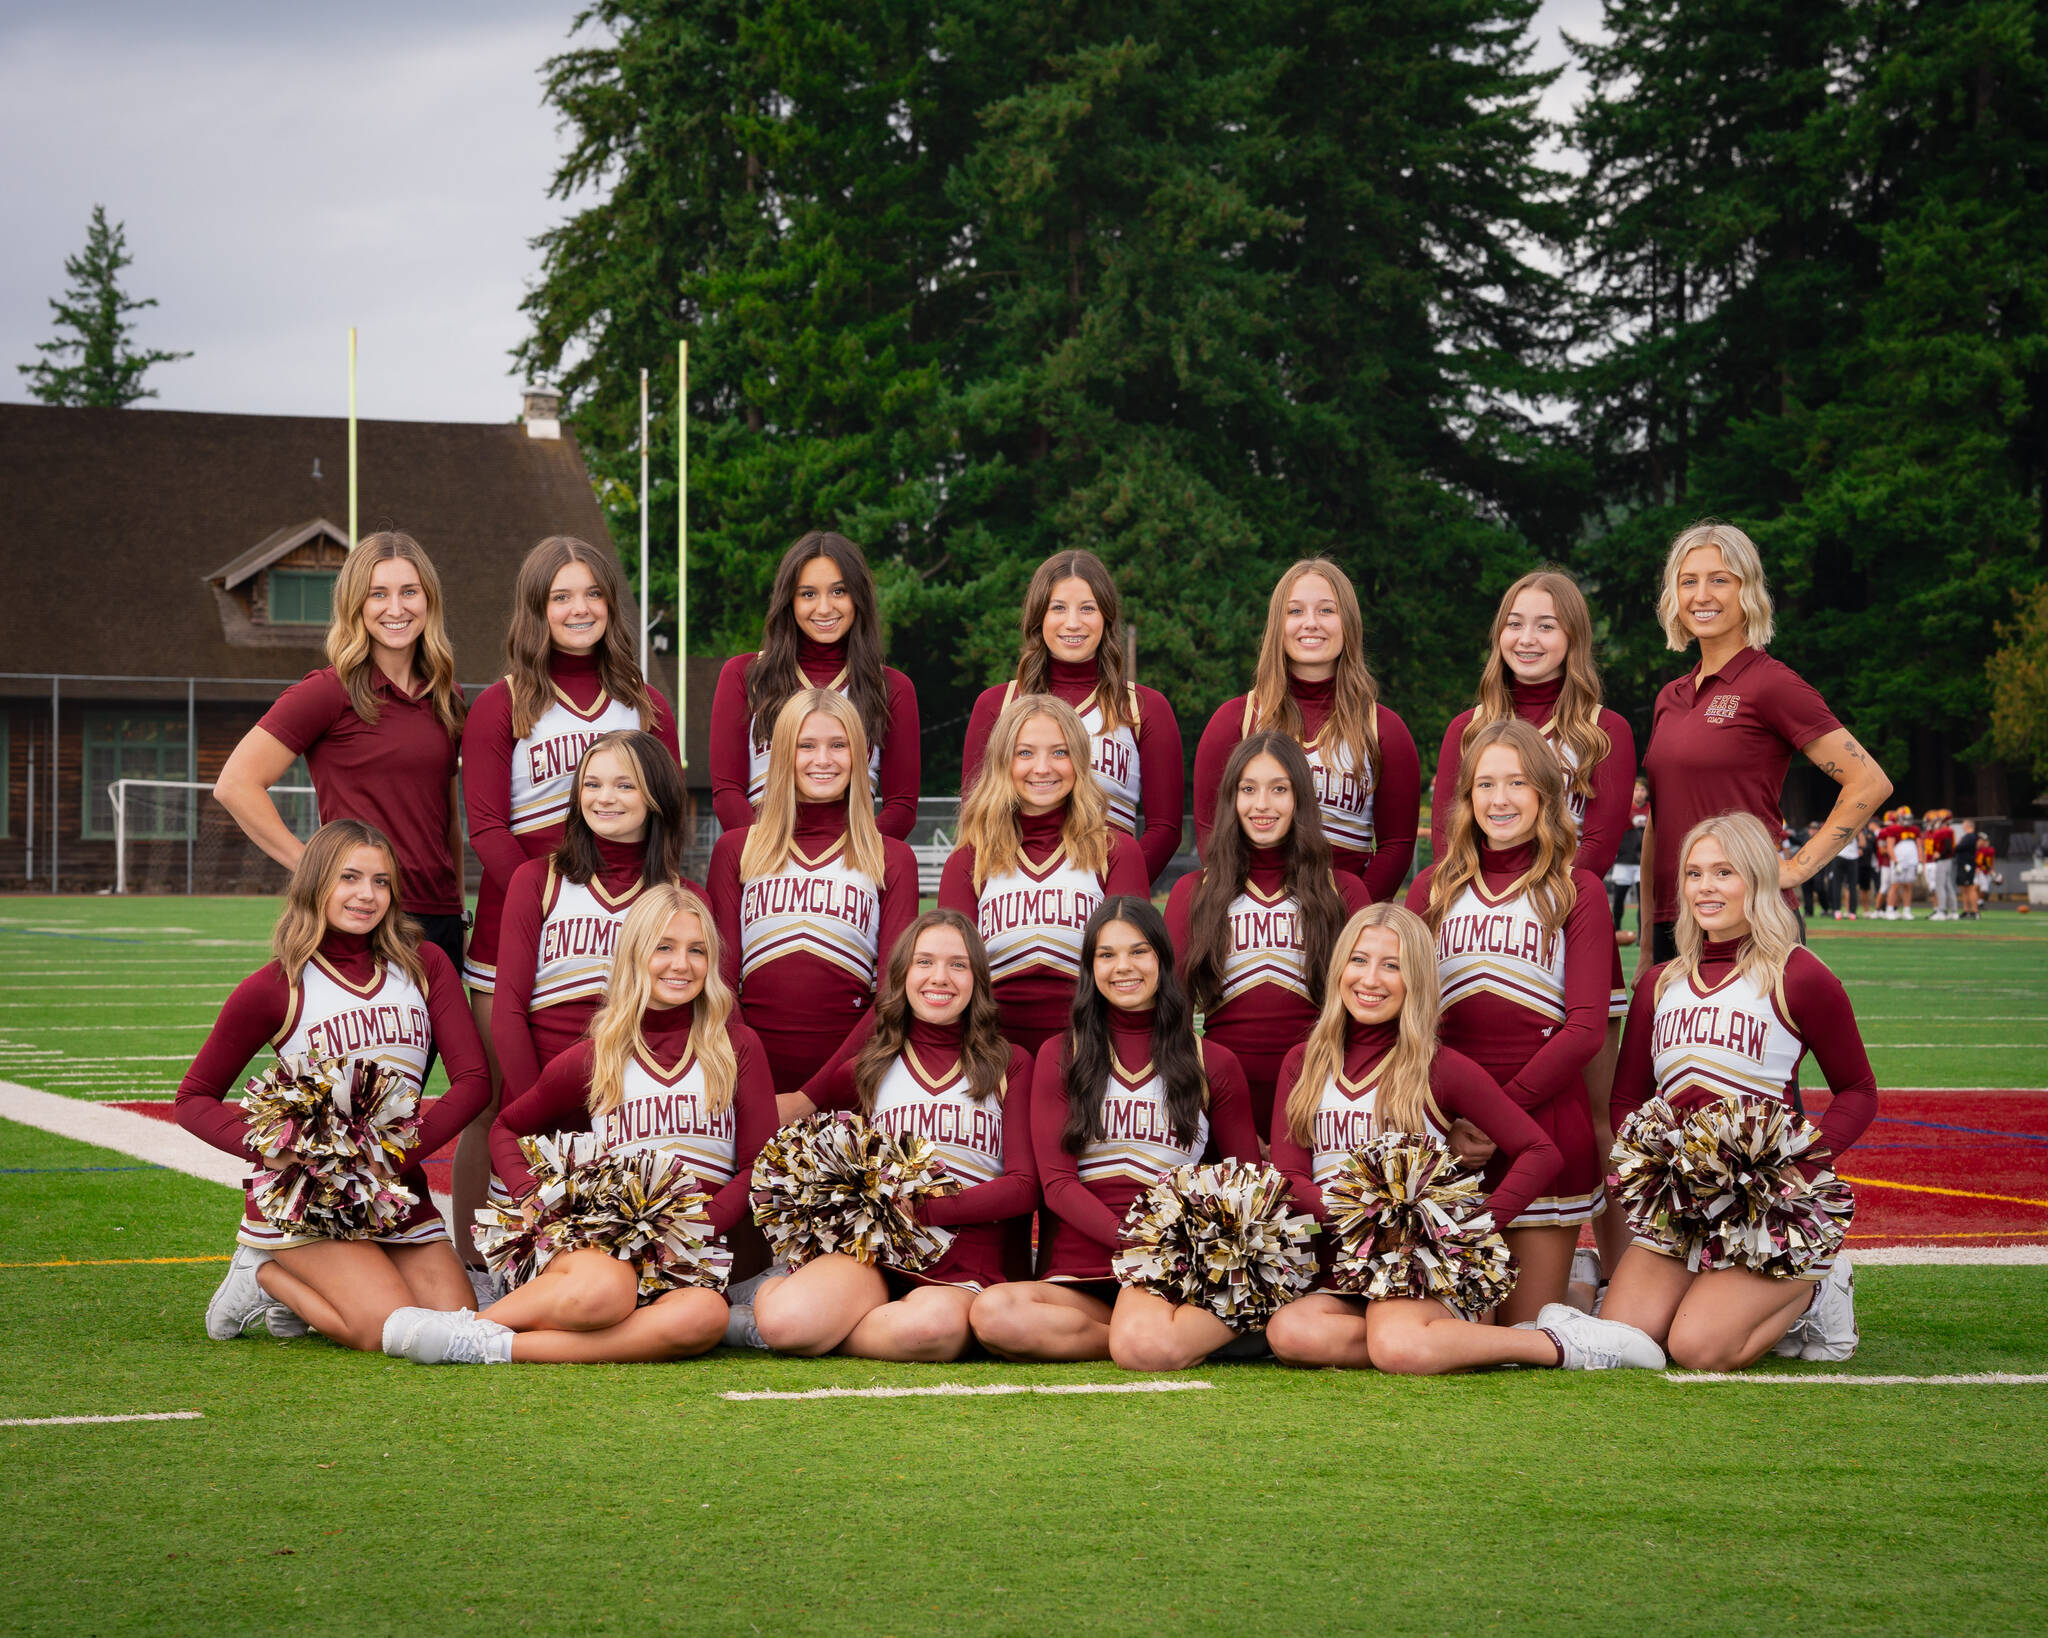 Photo by Timothy Dehnert / https://timmydphotography.com/
The Enumclaw cheer team.